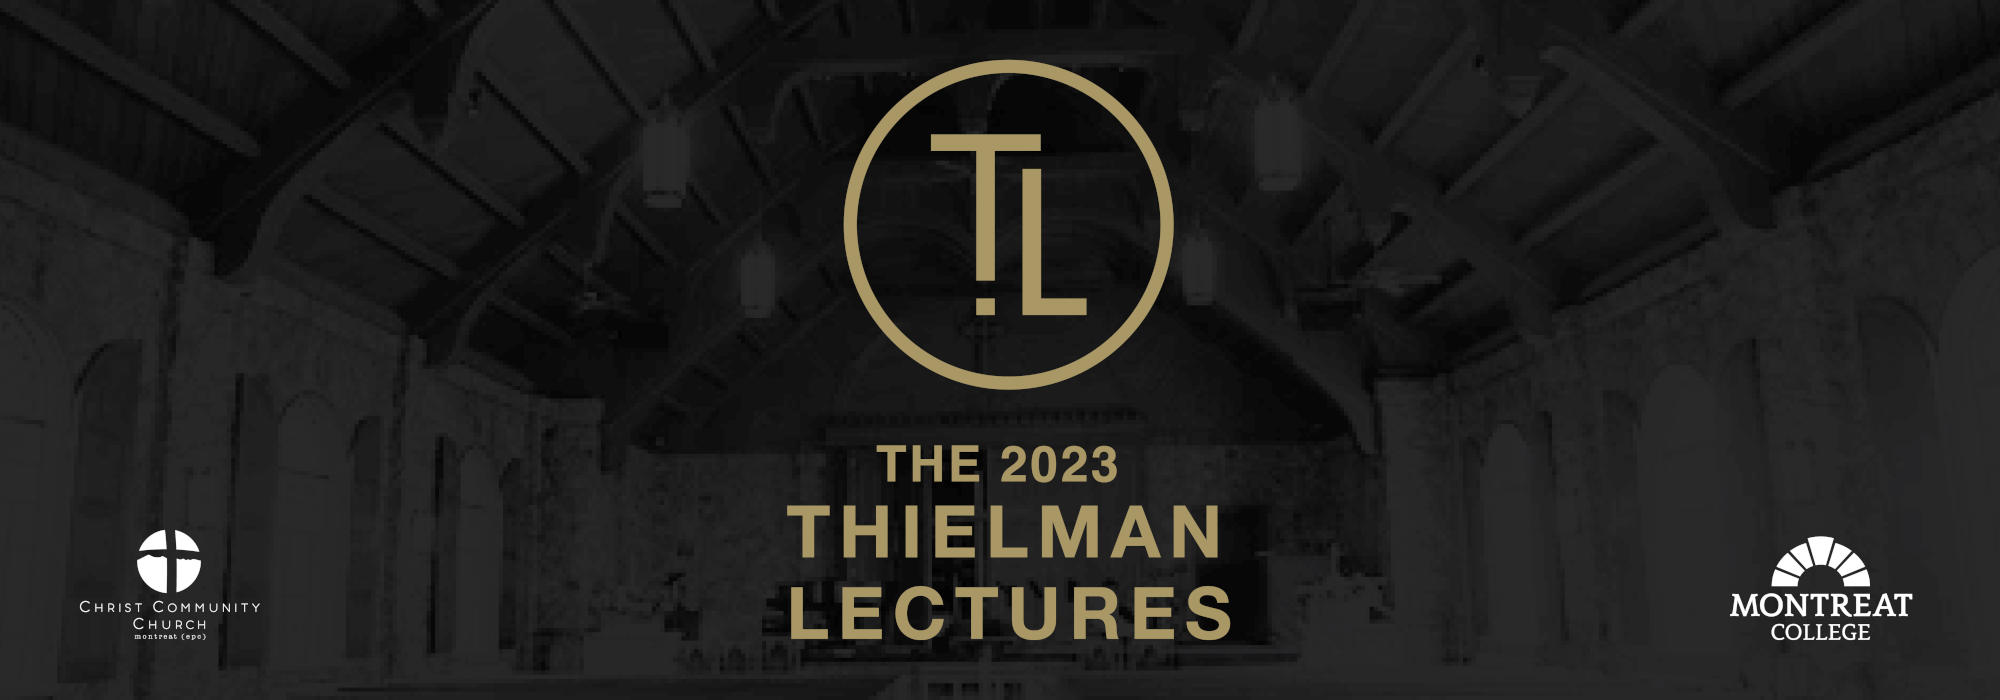 2023 Theilman Lectures banner image